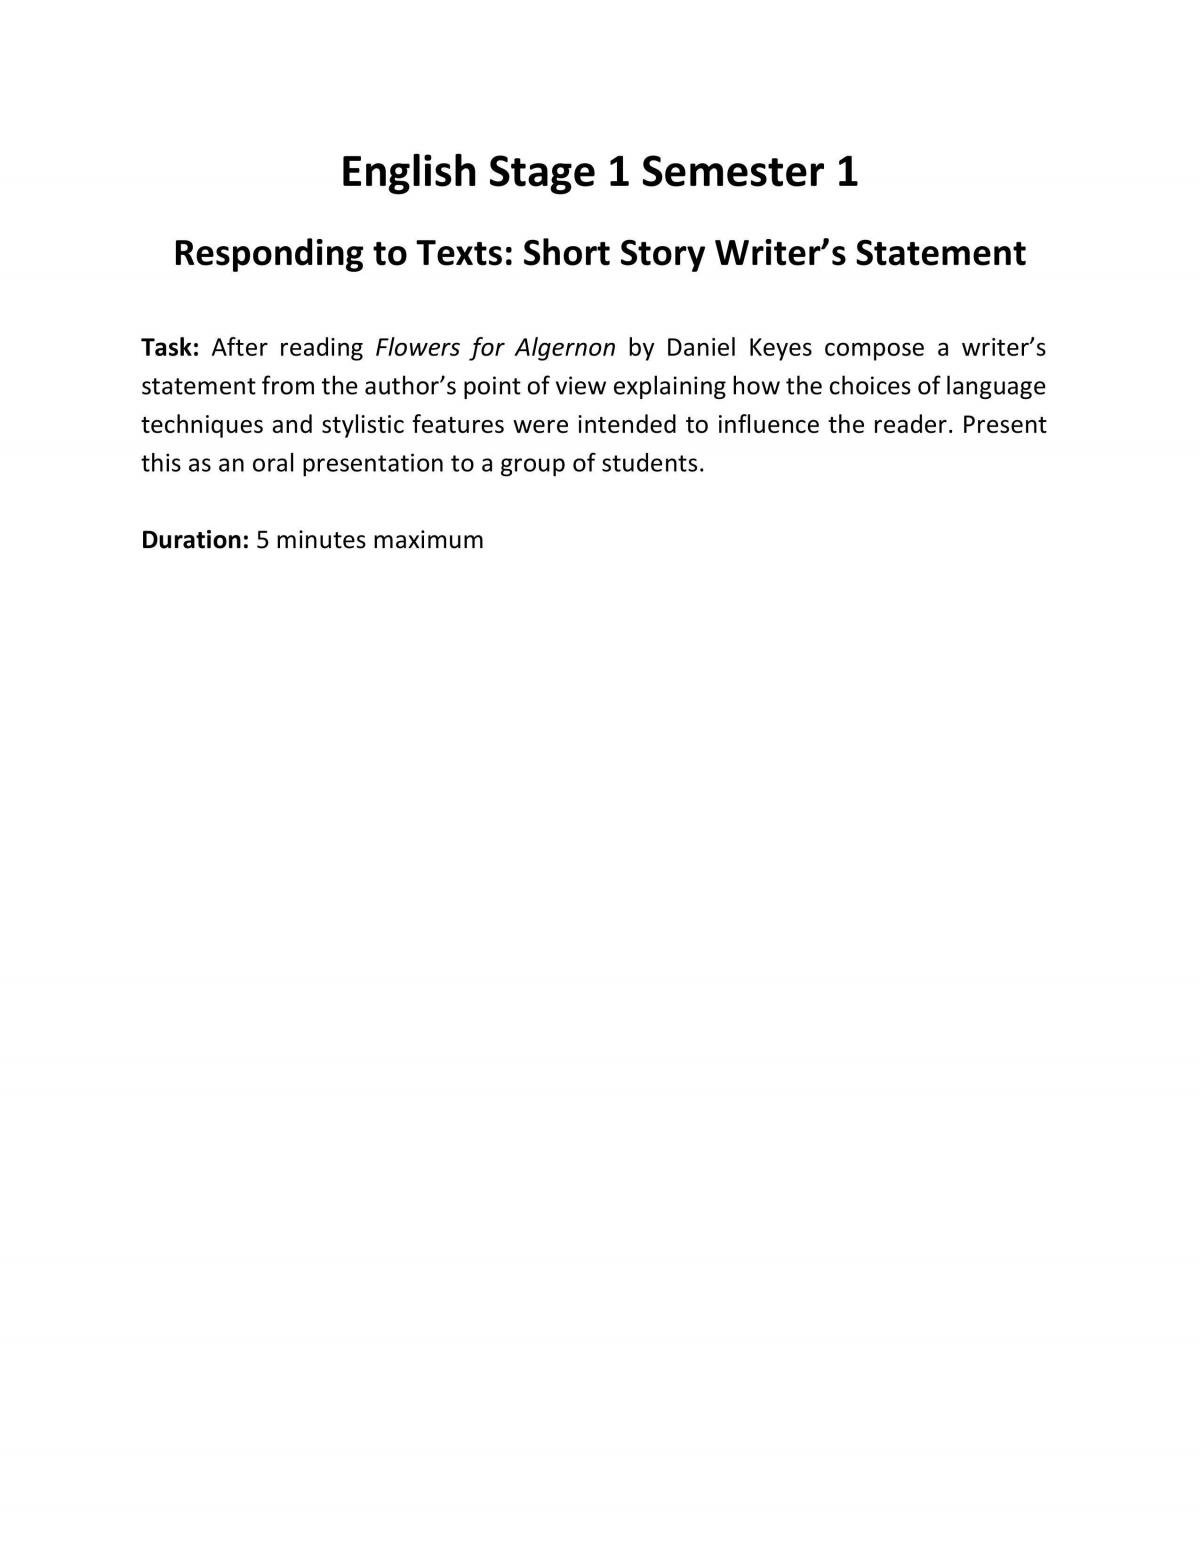 Flowers for Algernon Writer's Statement - Page 1